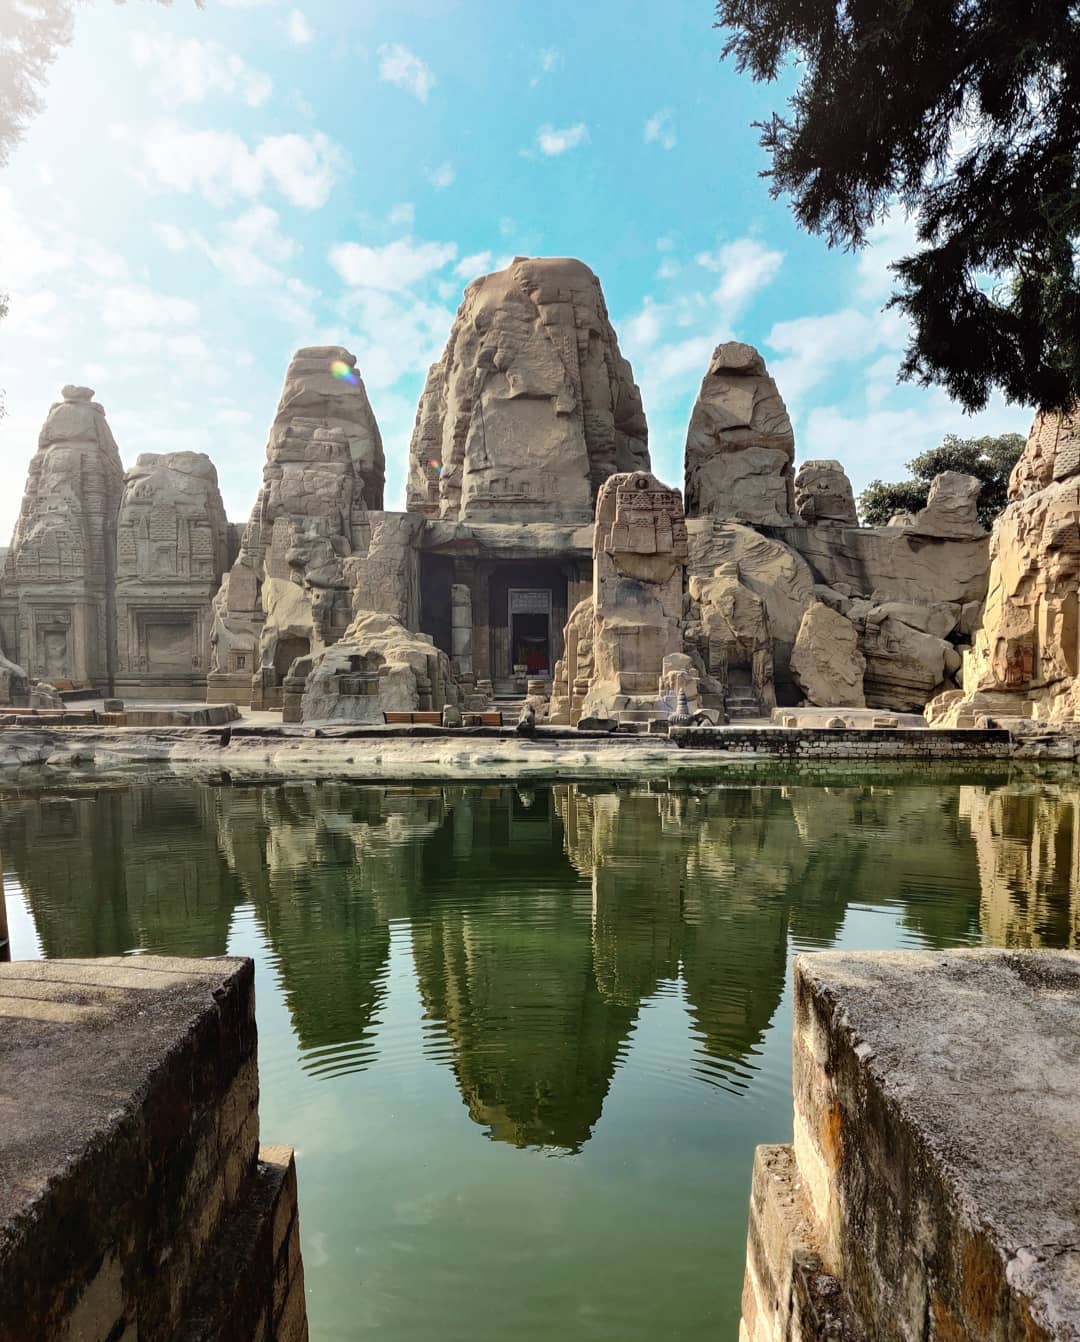 A glimpse of Masroor rock-cut temple complex in the Kangra Valley.